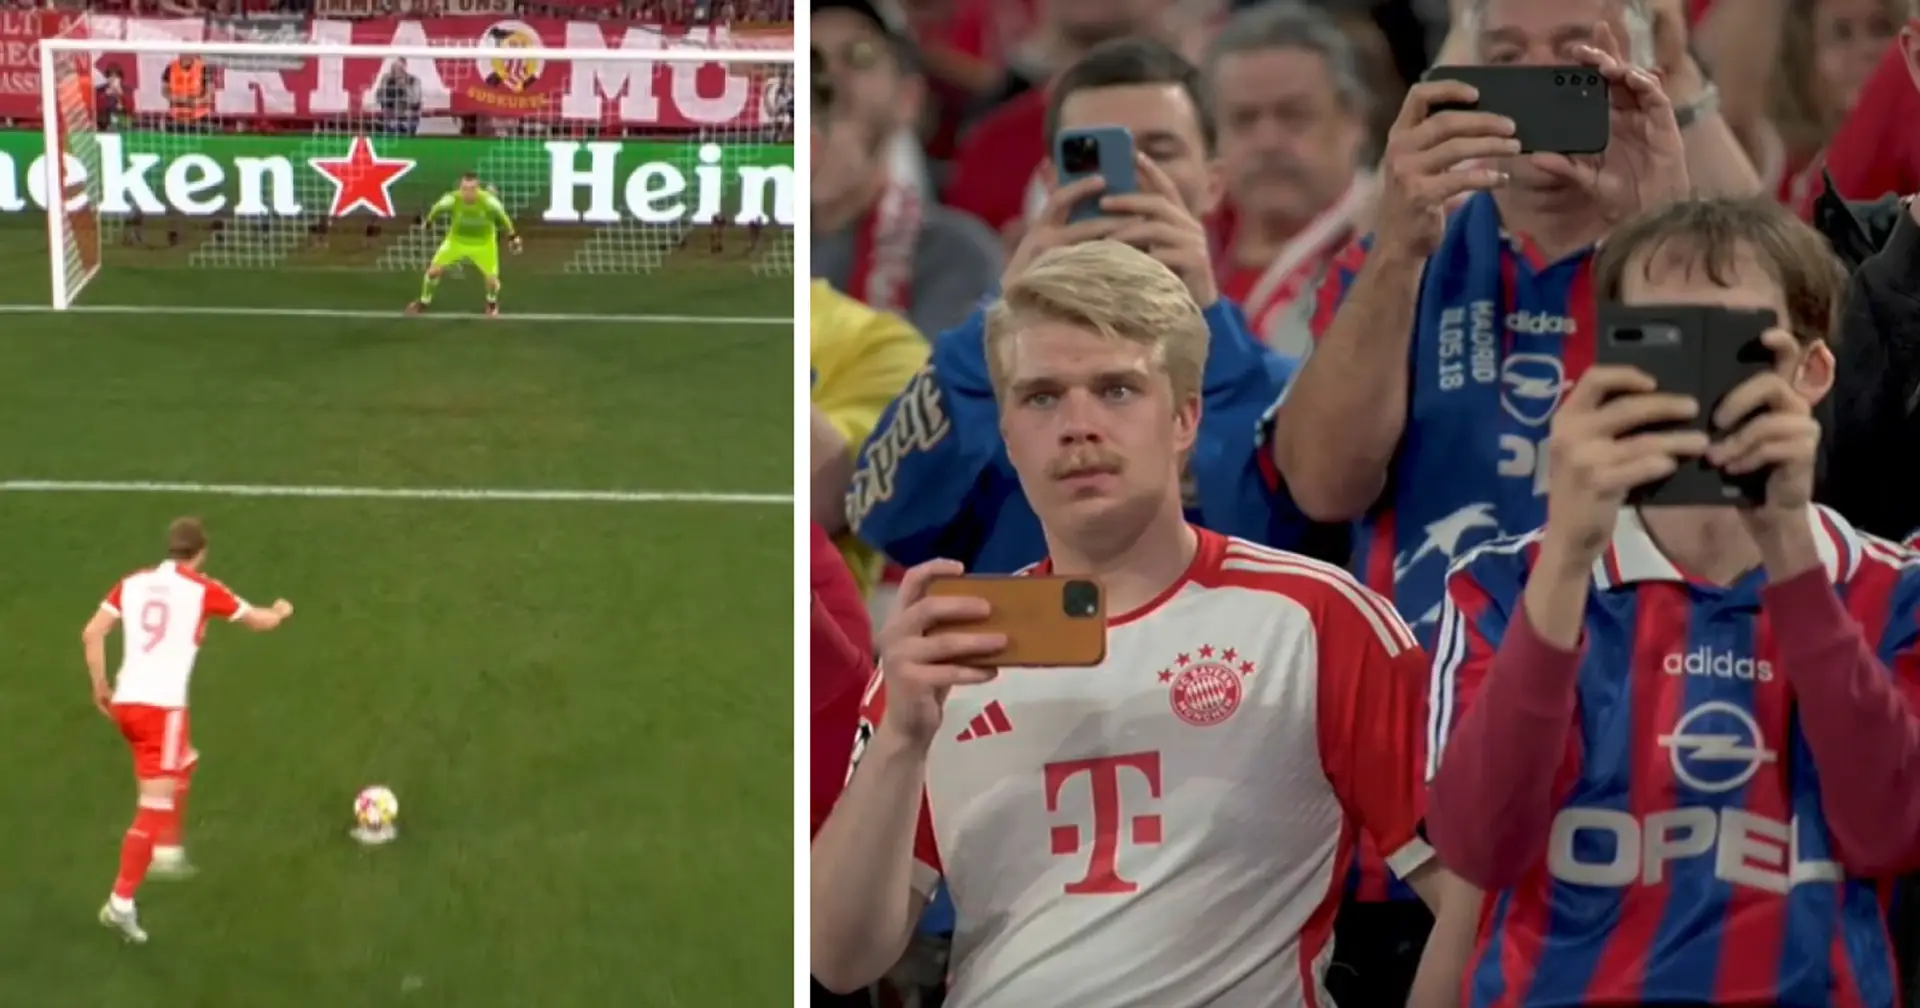 One image from Bayern v Real Madrid shows 'the ultimate wrong with football'